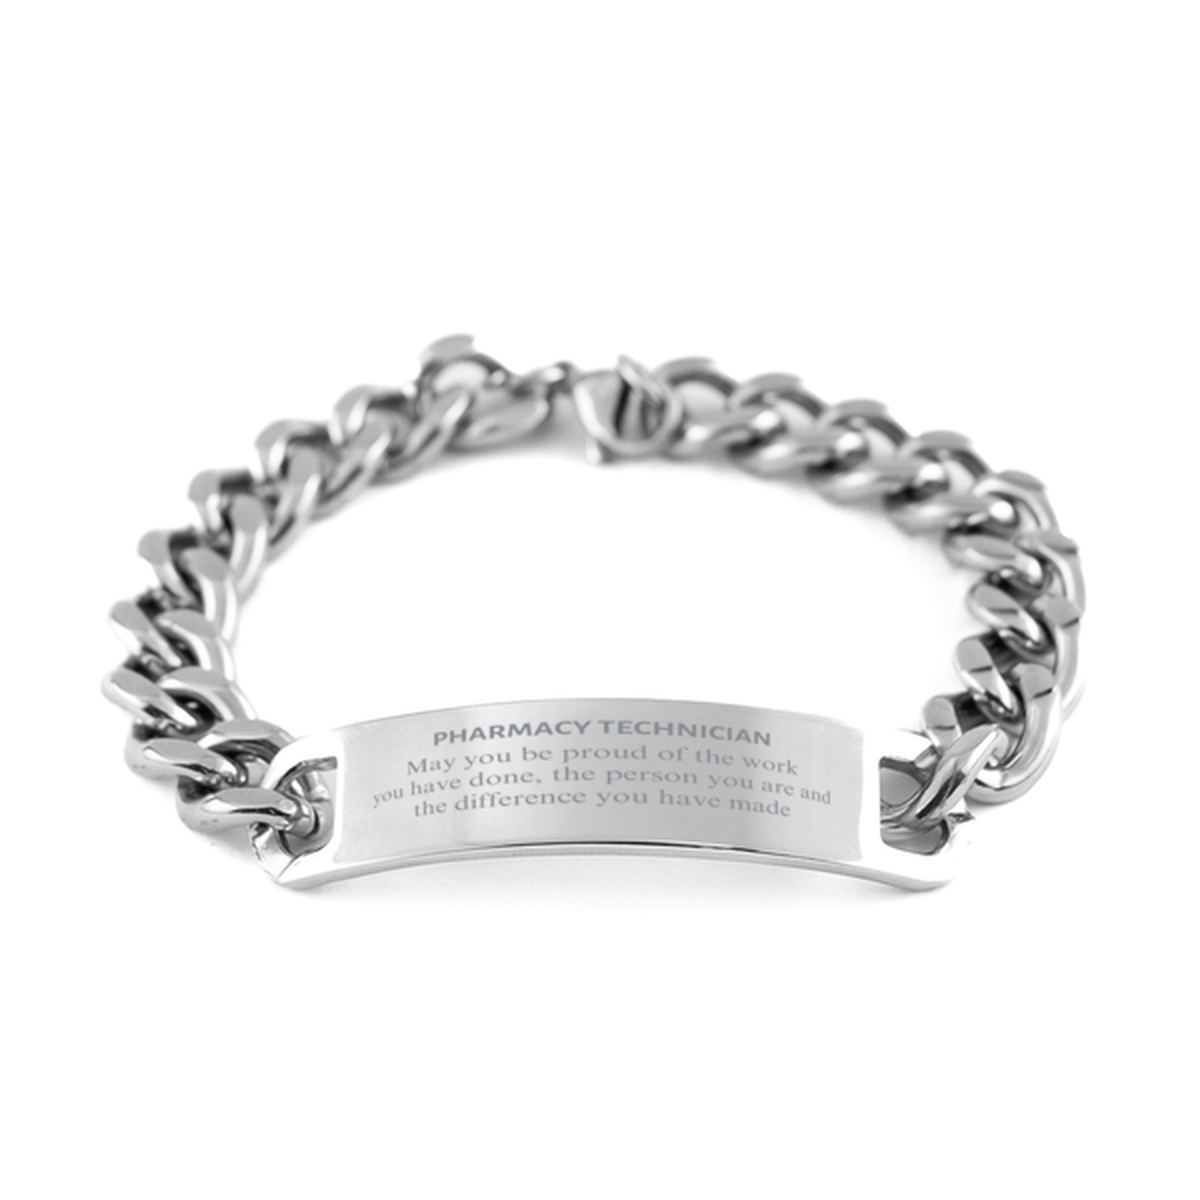 Pharmacy Technician May you be proud of the work you have done, Retirement Pharmacy Technician Cuban Chain Stainless Steel Bracelet for Colleague Appreciation Gifts Amazing for Pharmacy Technician